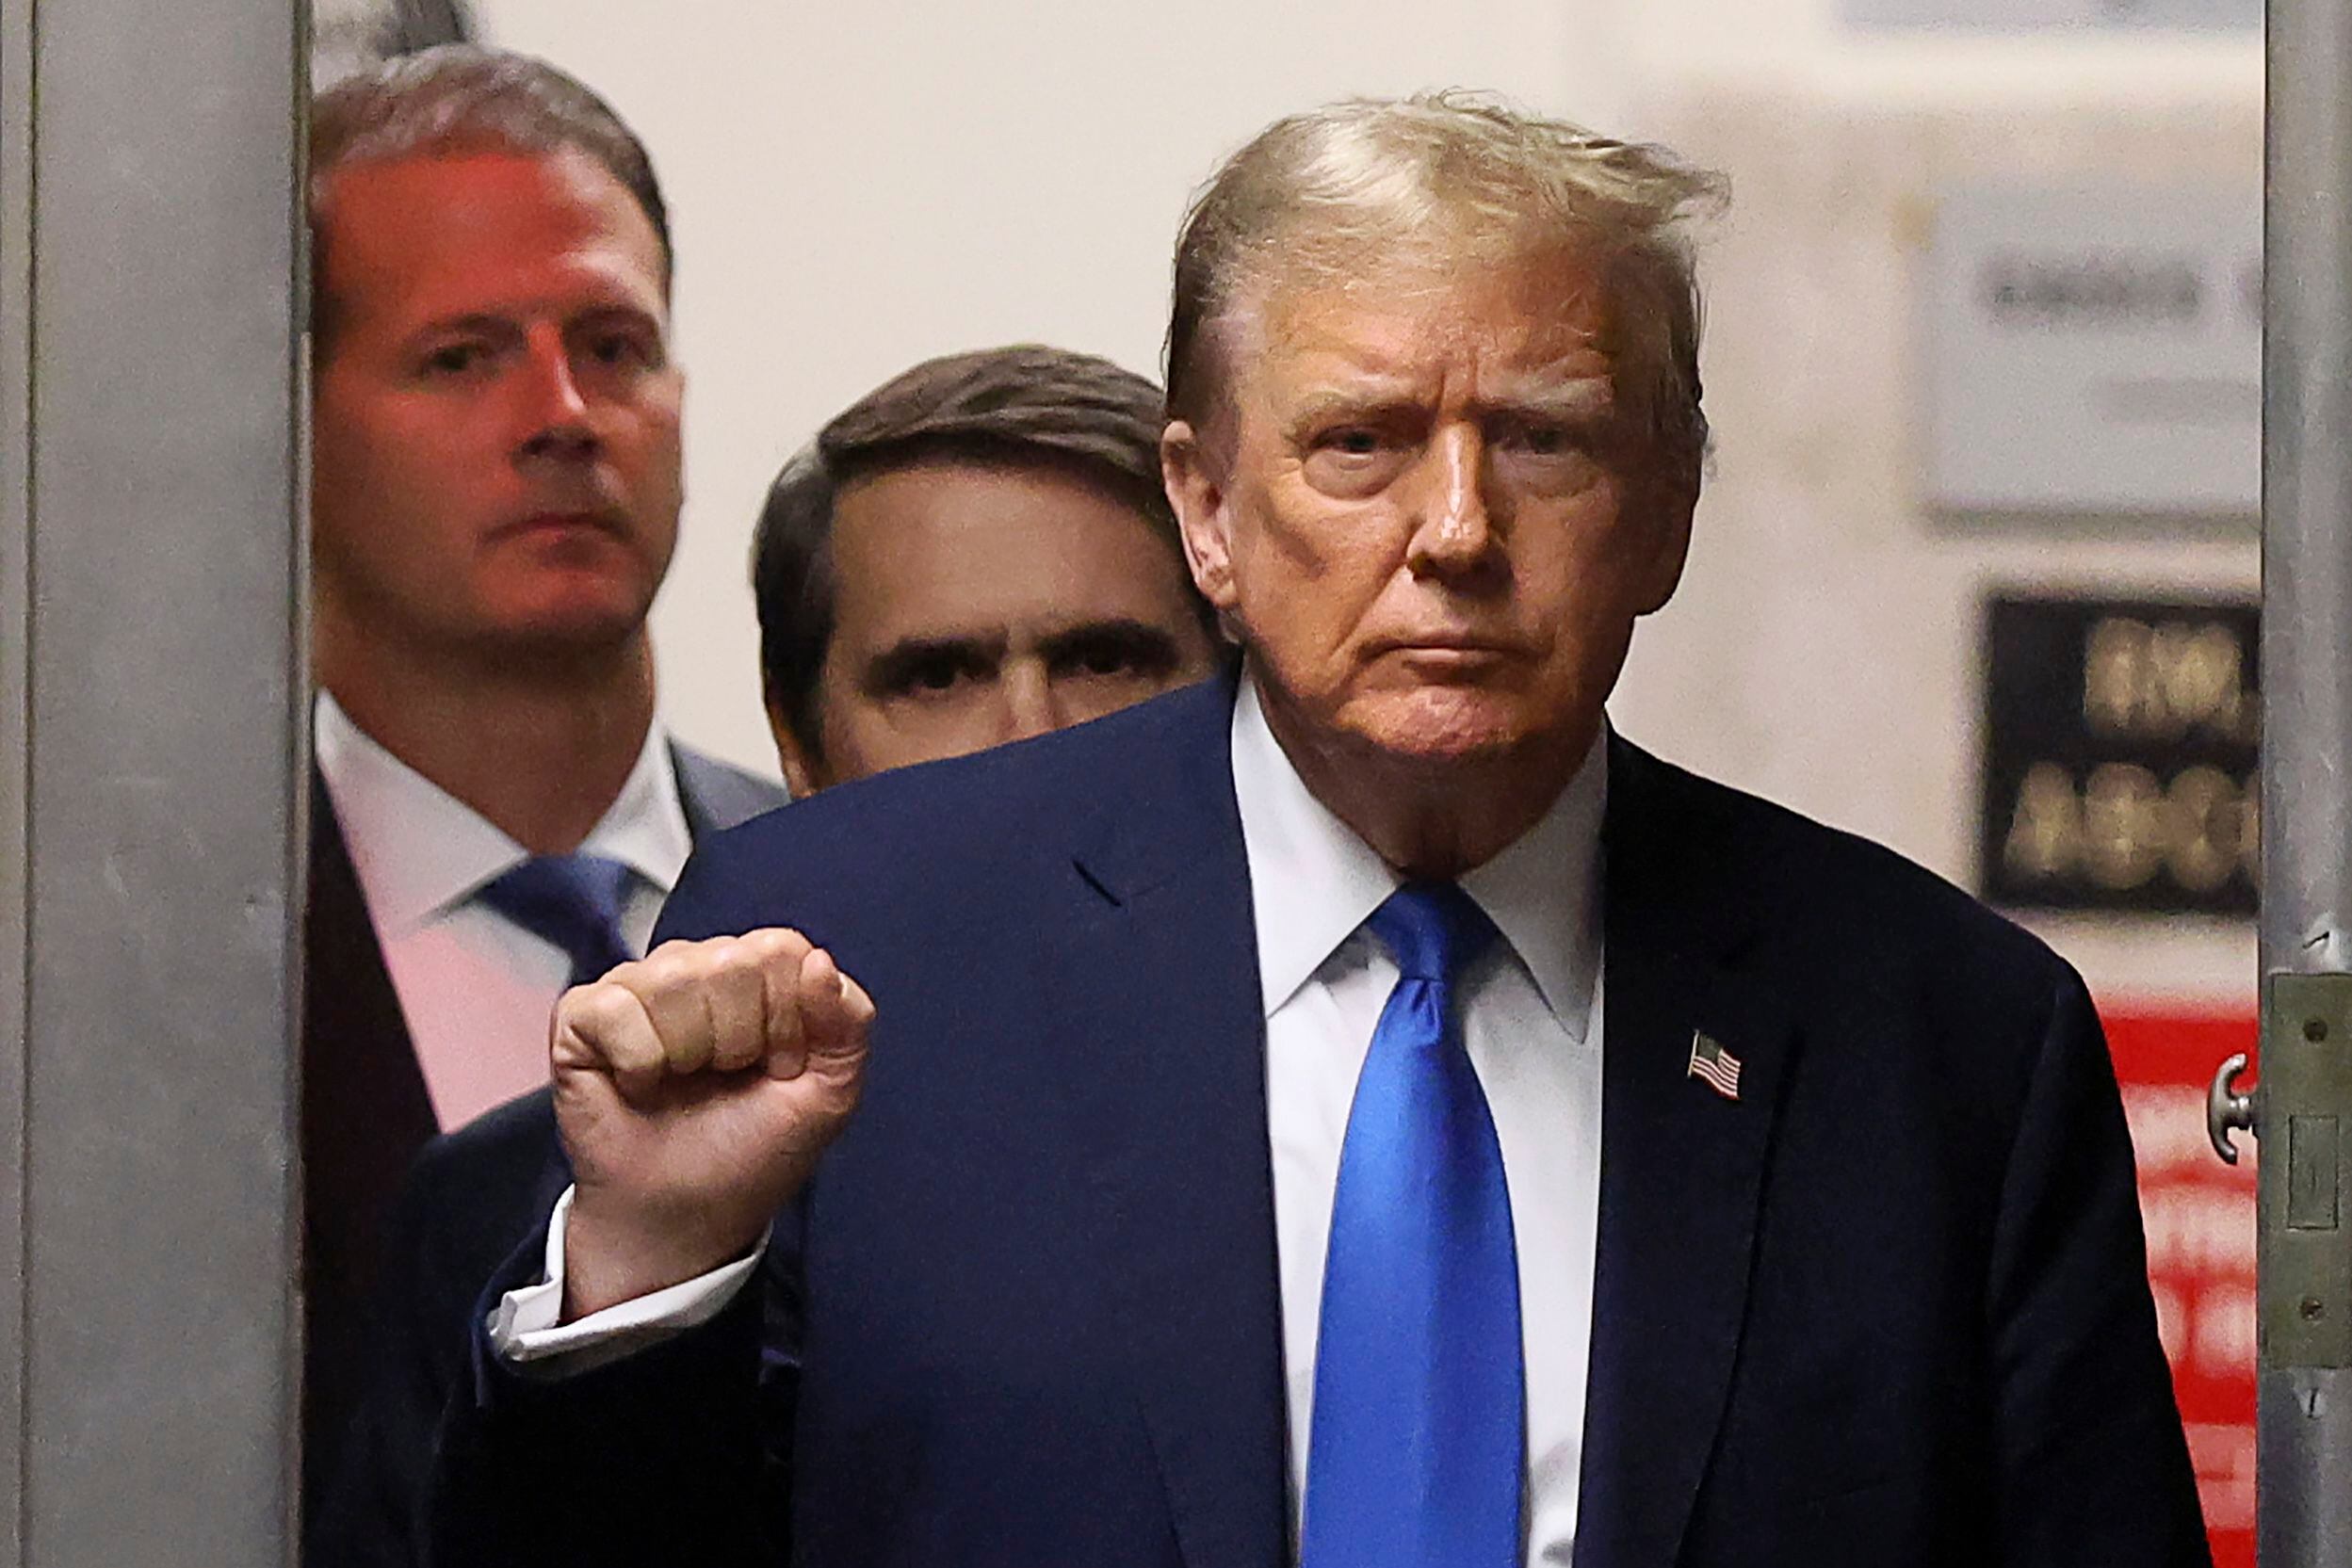 Former President Donald Trump gestures as he returns to the courtroom during a recess in his criminal trial at Manhattan Criminal Court on Thursday.